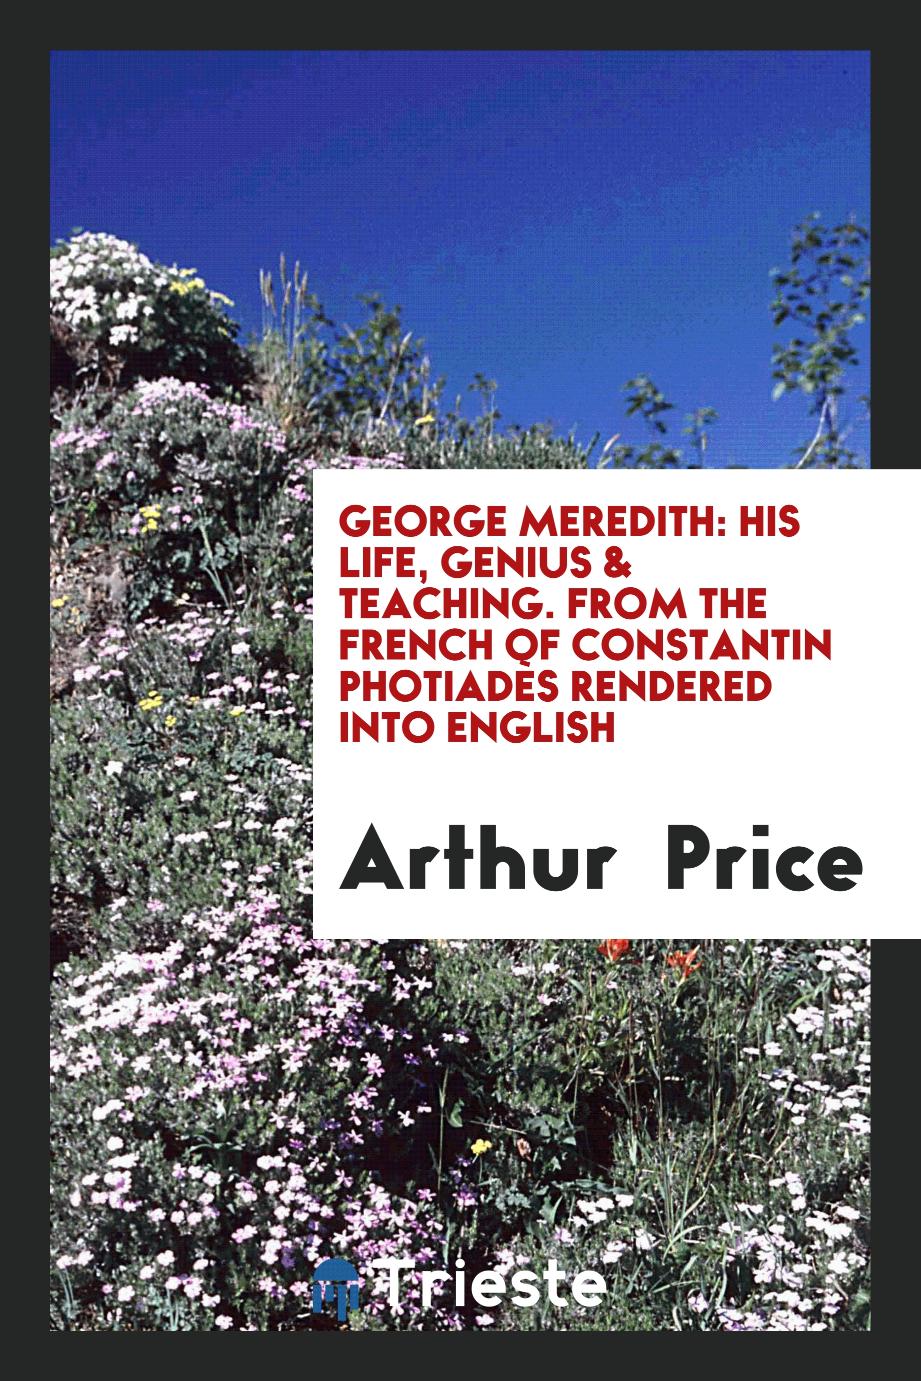 George Meredith: His Life, Genius & Teaching. From the French of Constantin Photiadès Rendered into English